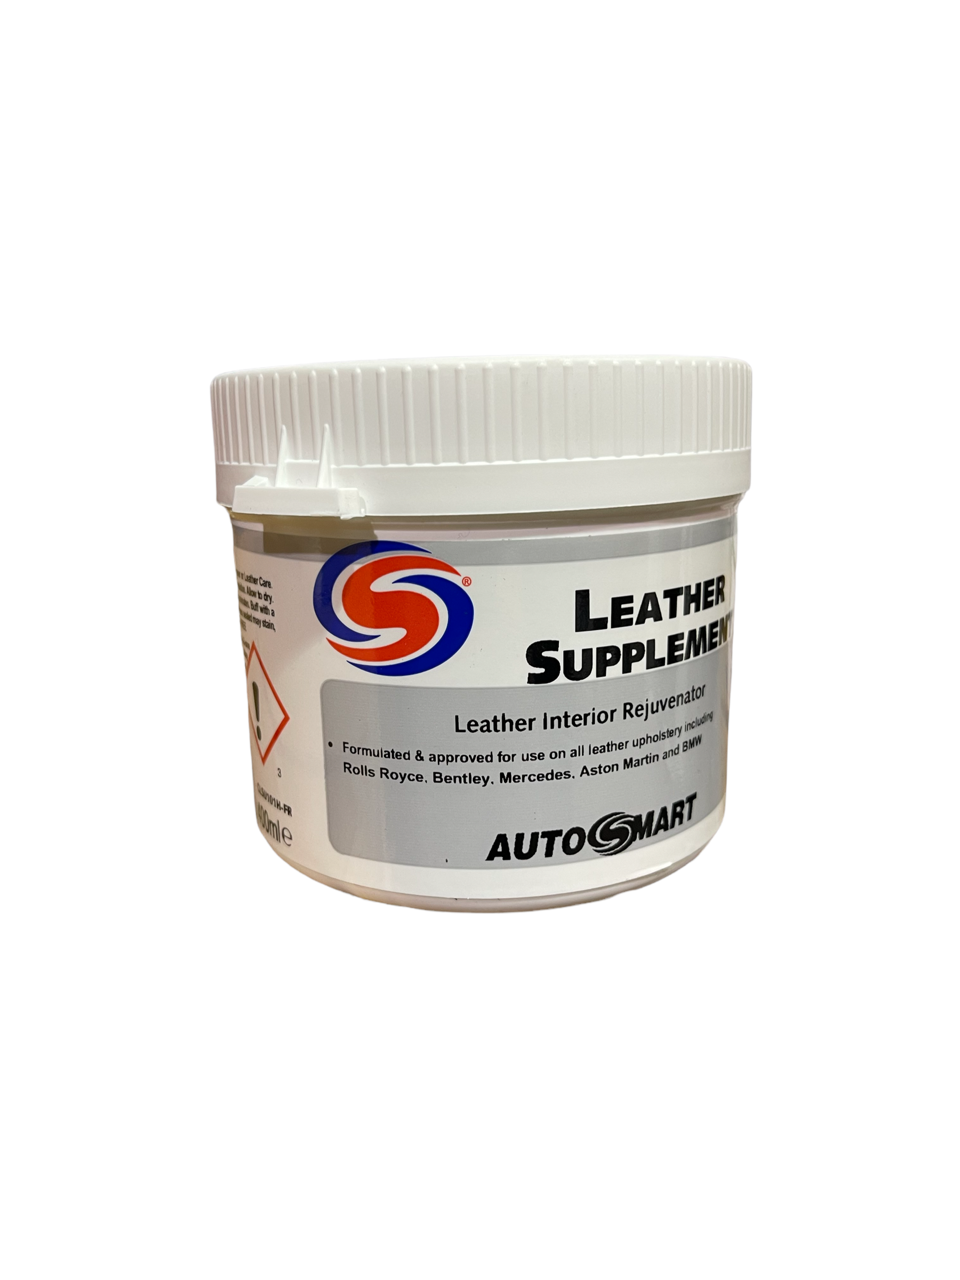 Leather Supplement - 400ml